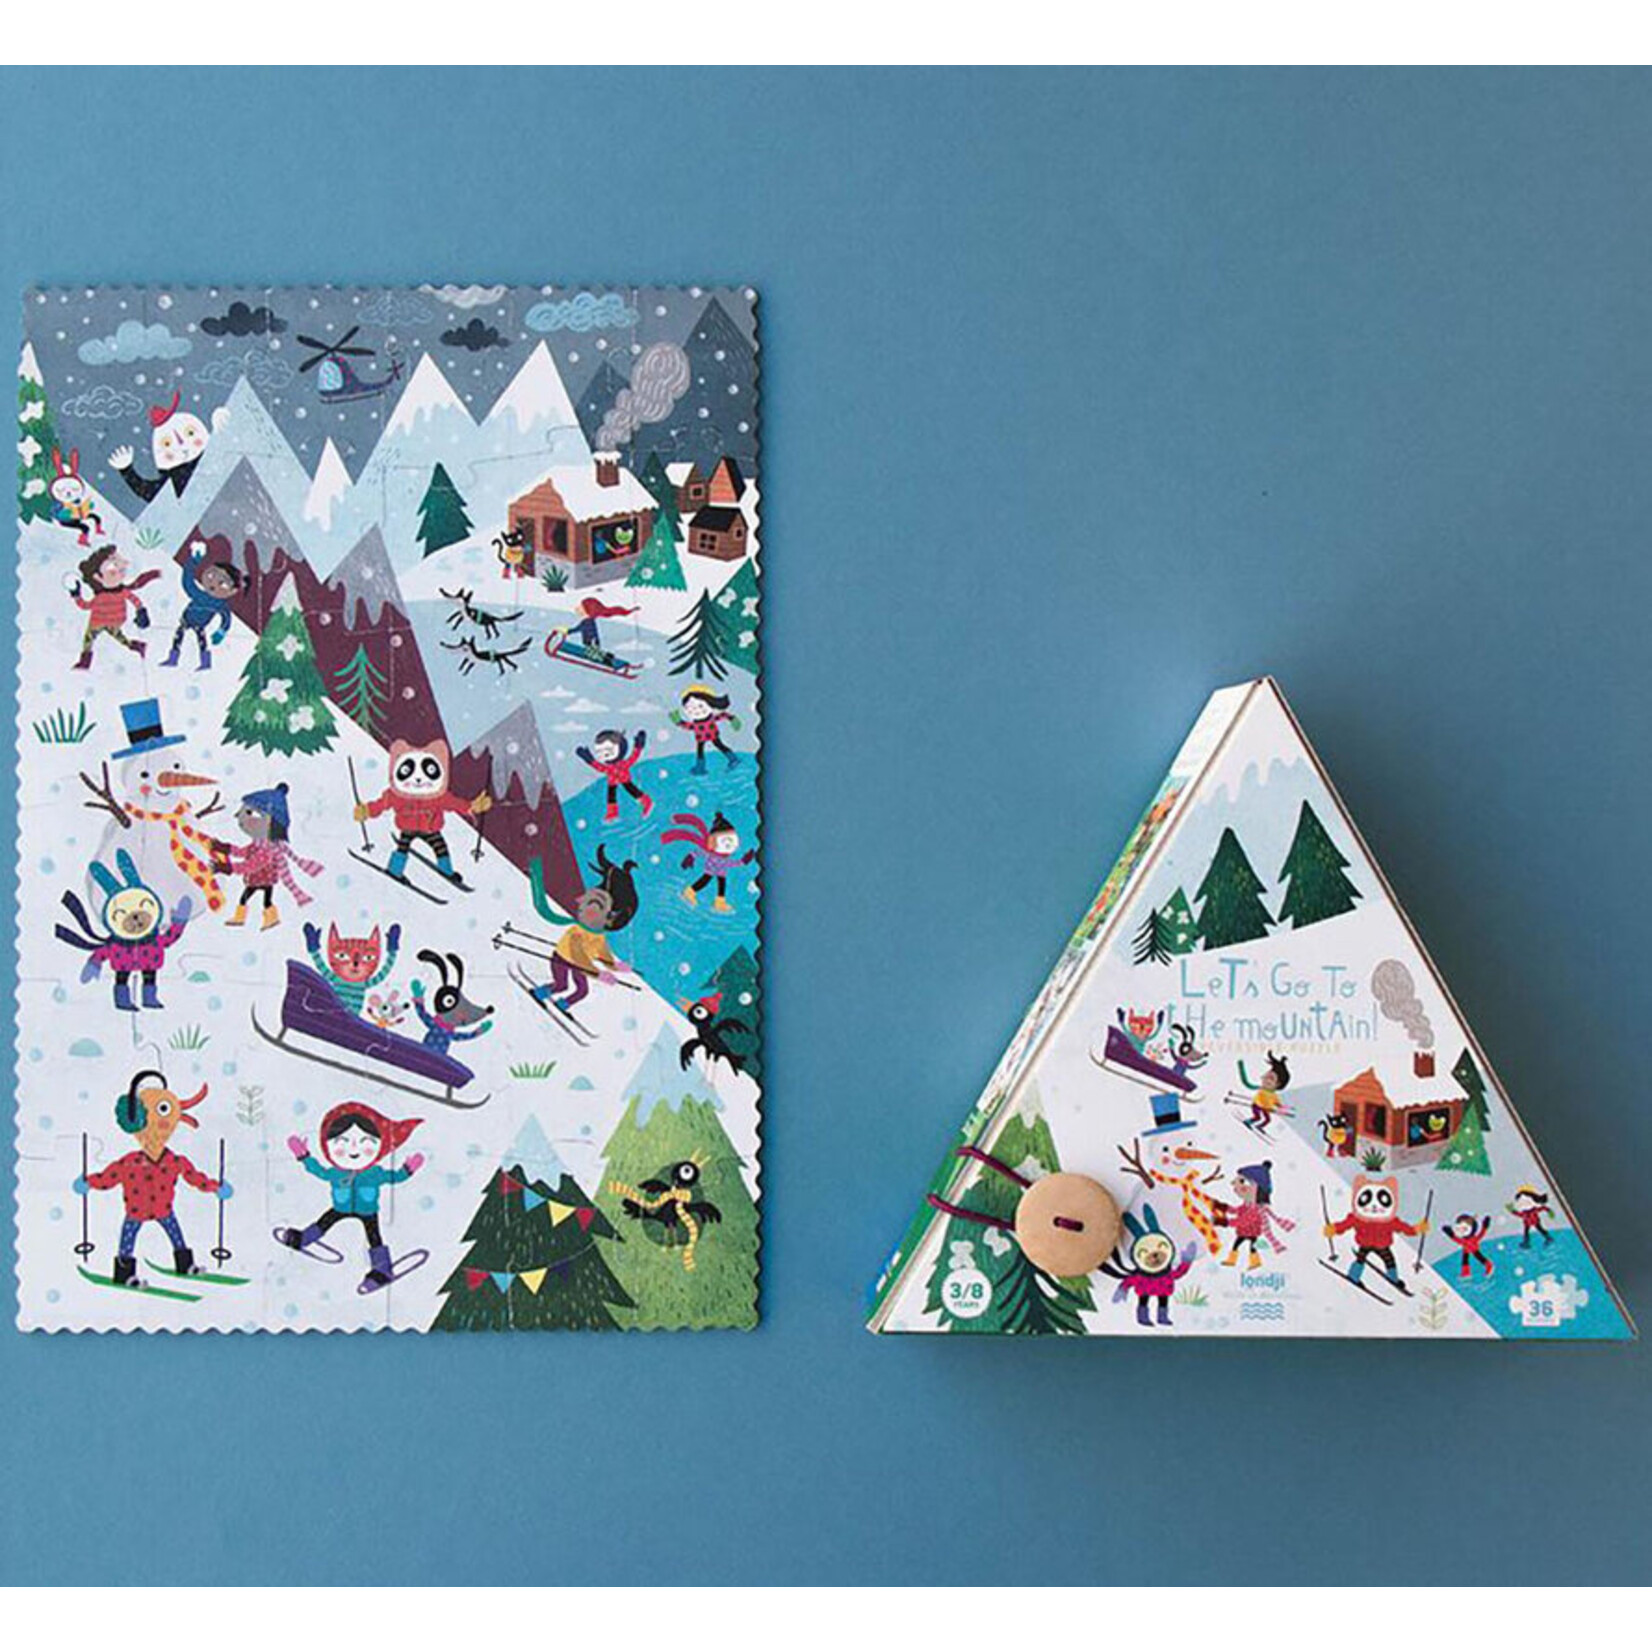 Londji Reversible Puzzle - Let's Go To the Mountain!